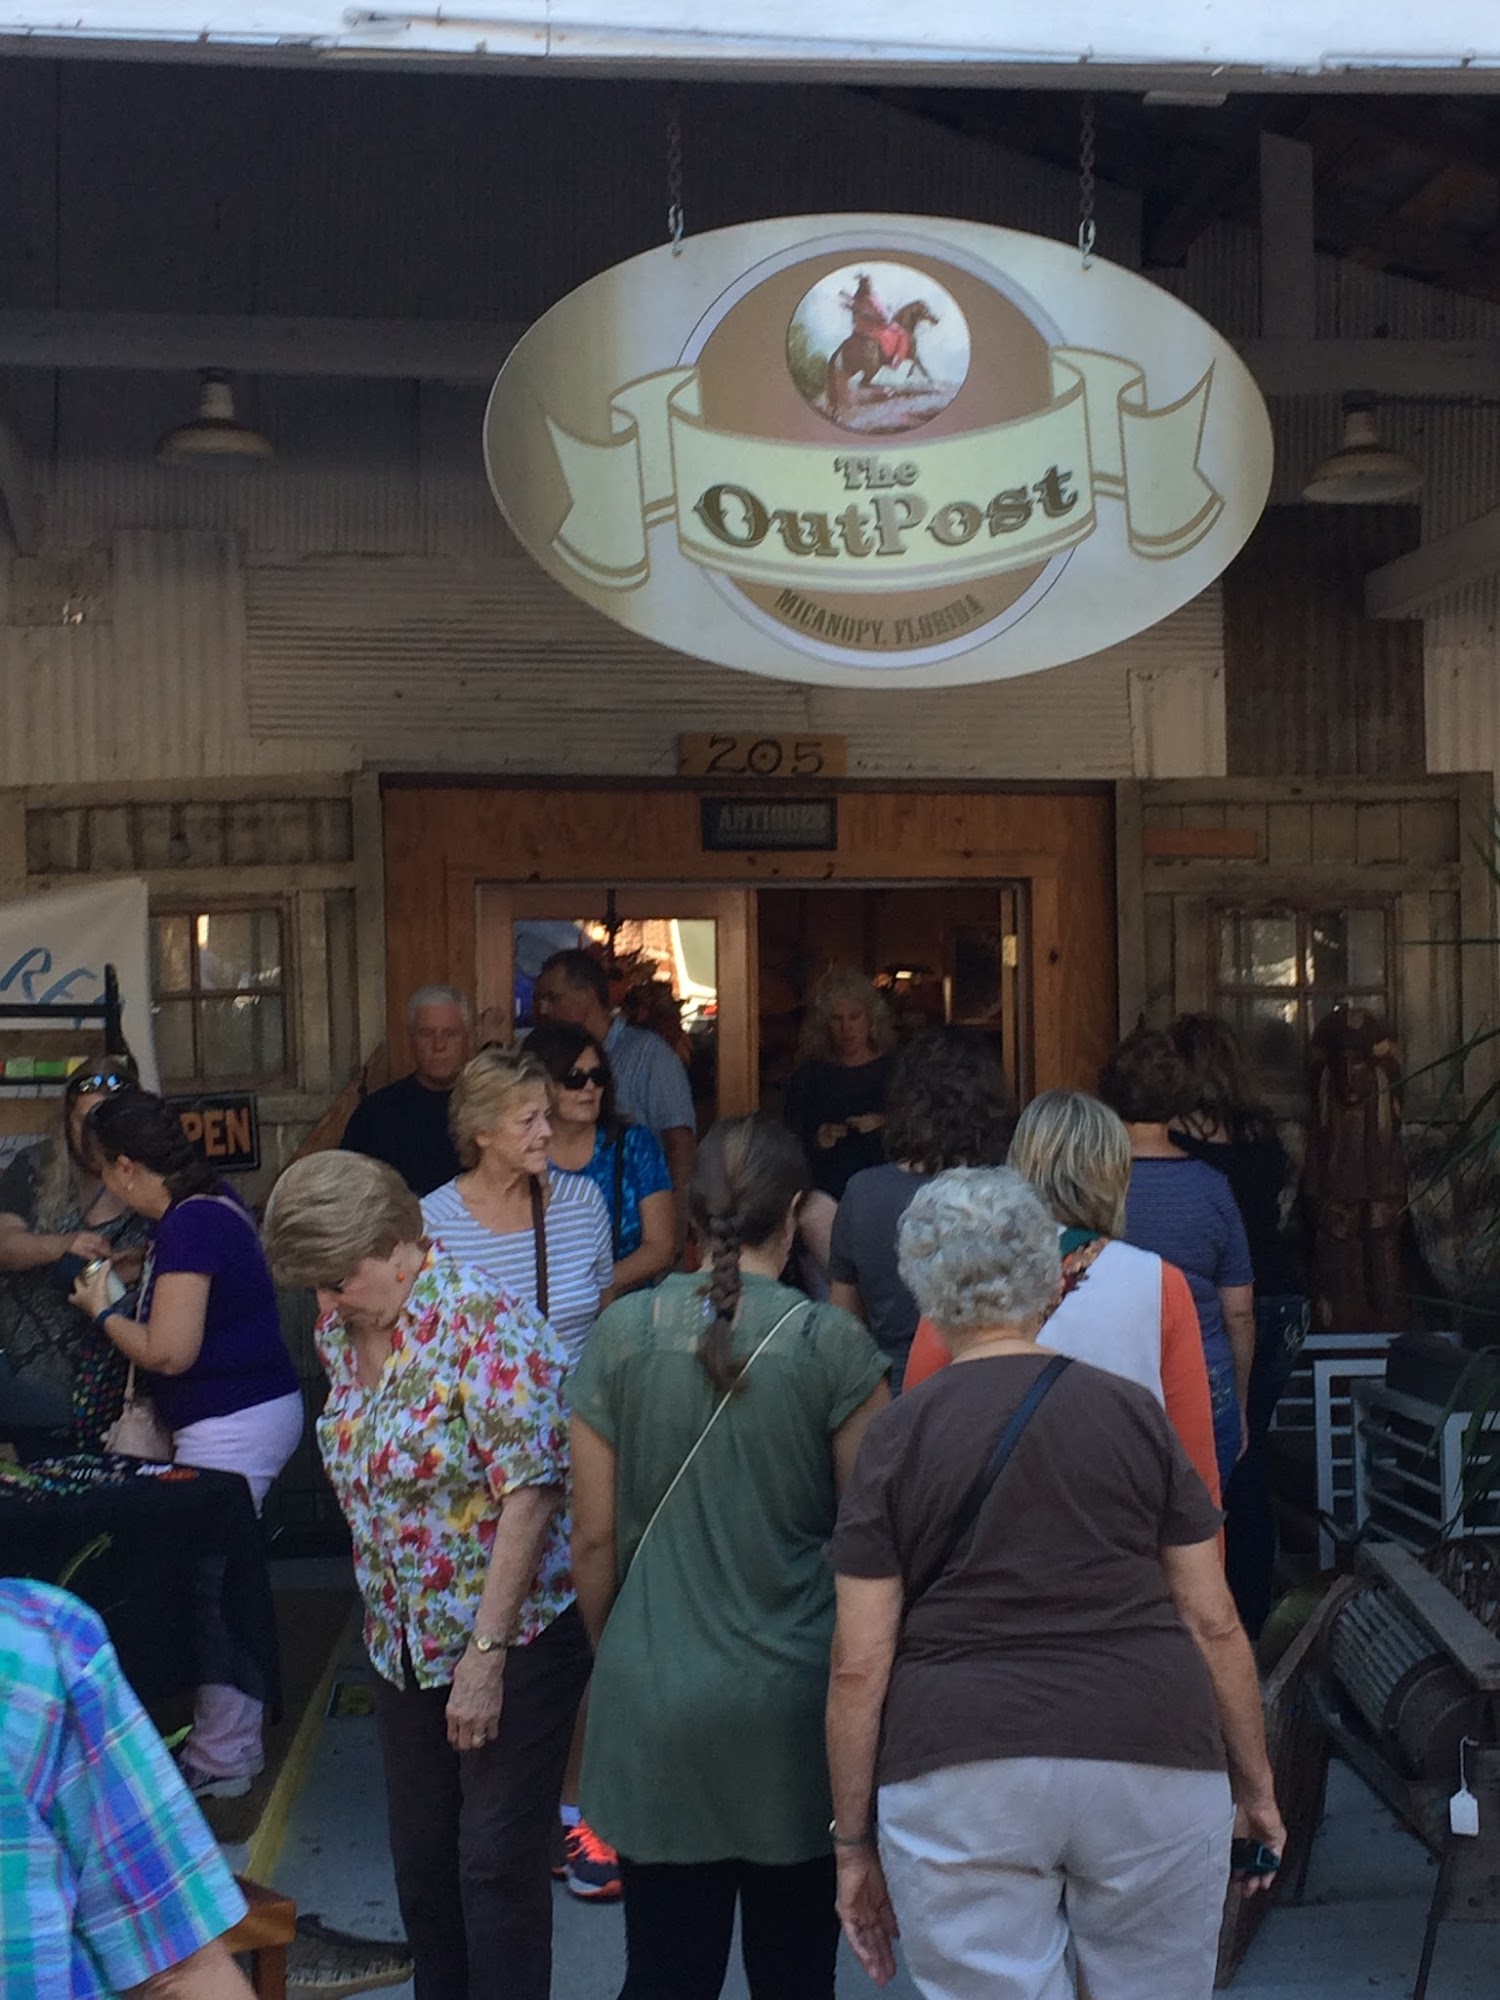 Micanopy Trading Outpost